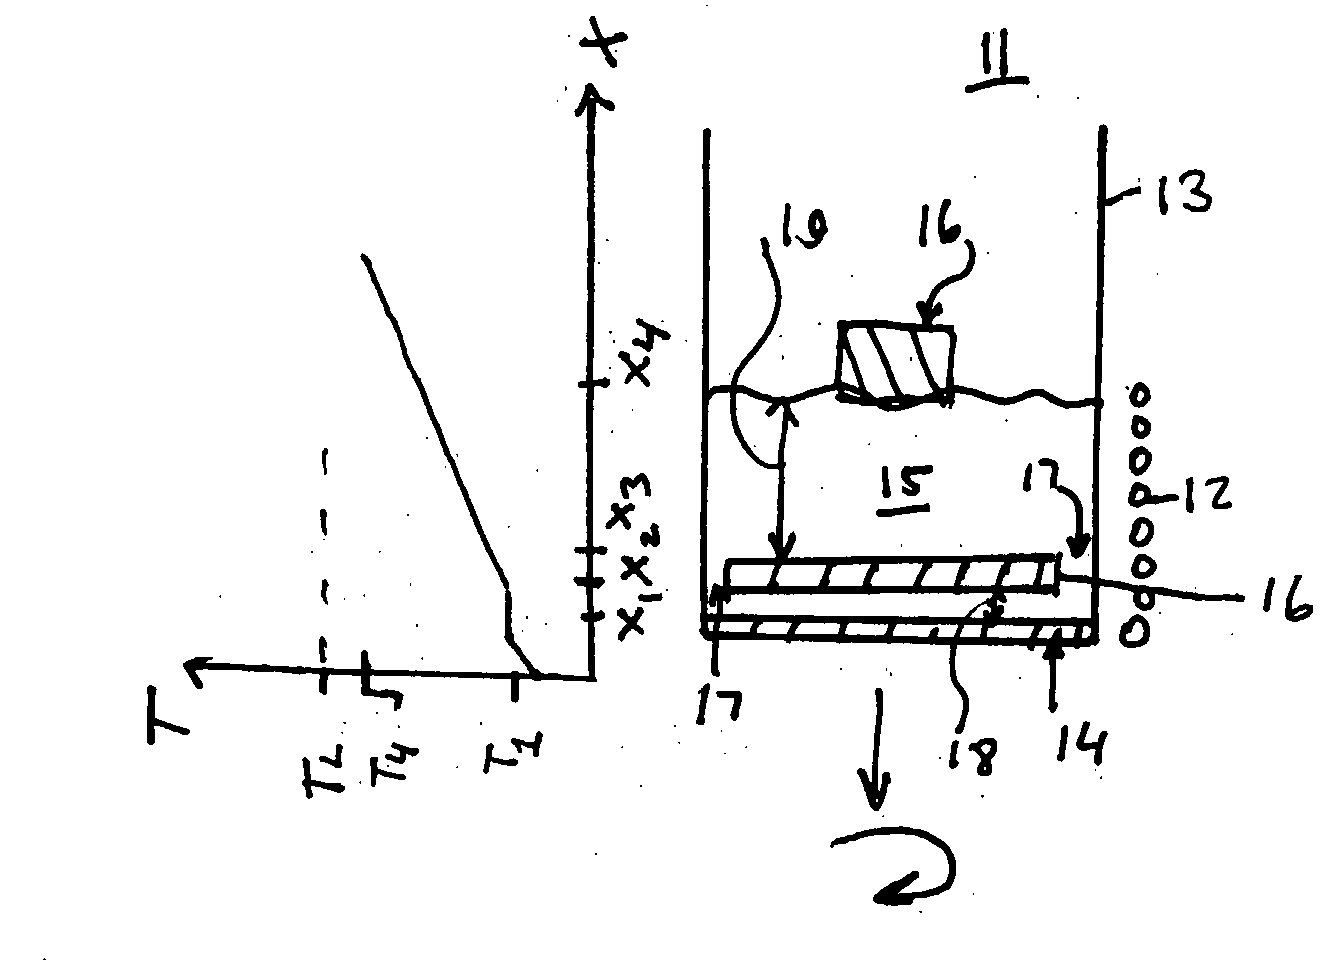 Method and Apparatus for Growth of Multi-Component Single Crystals